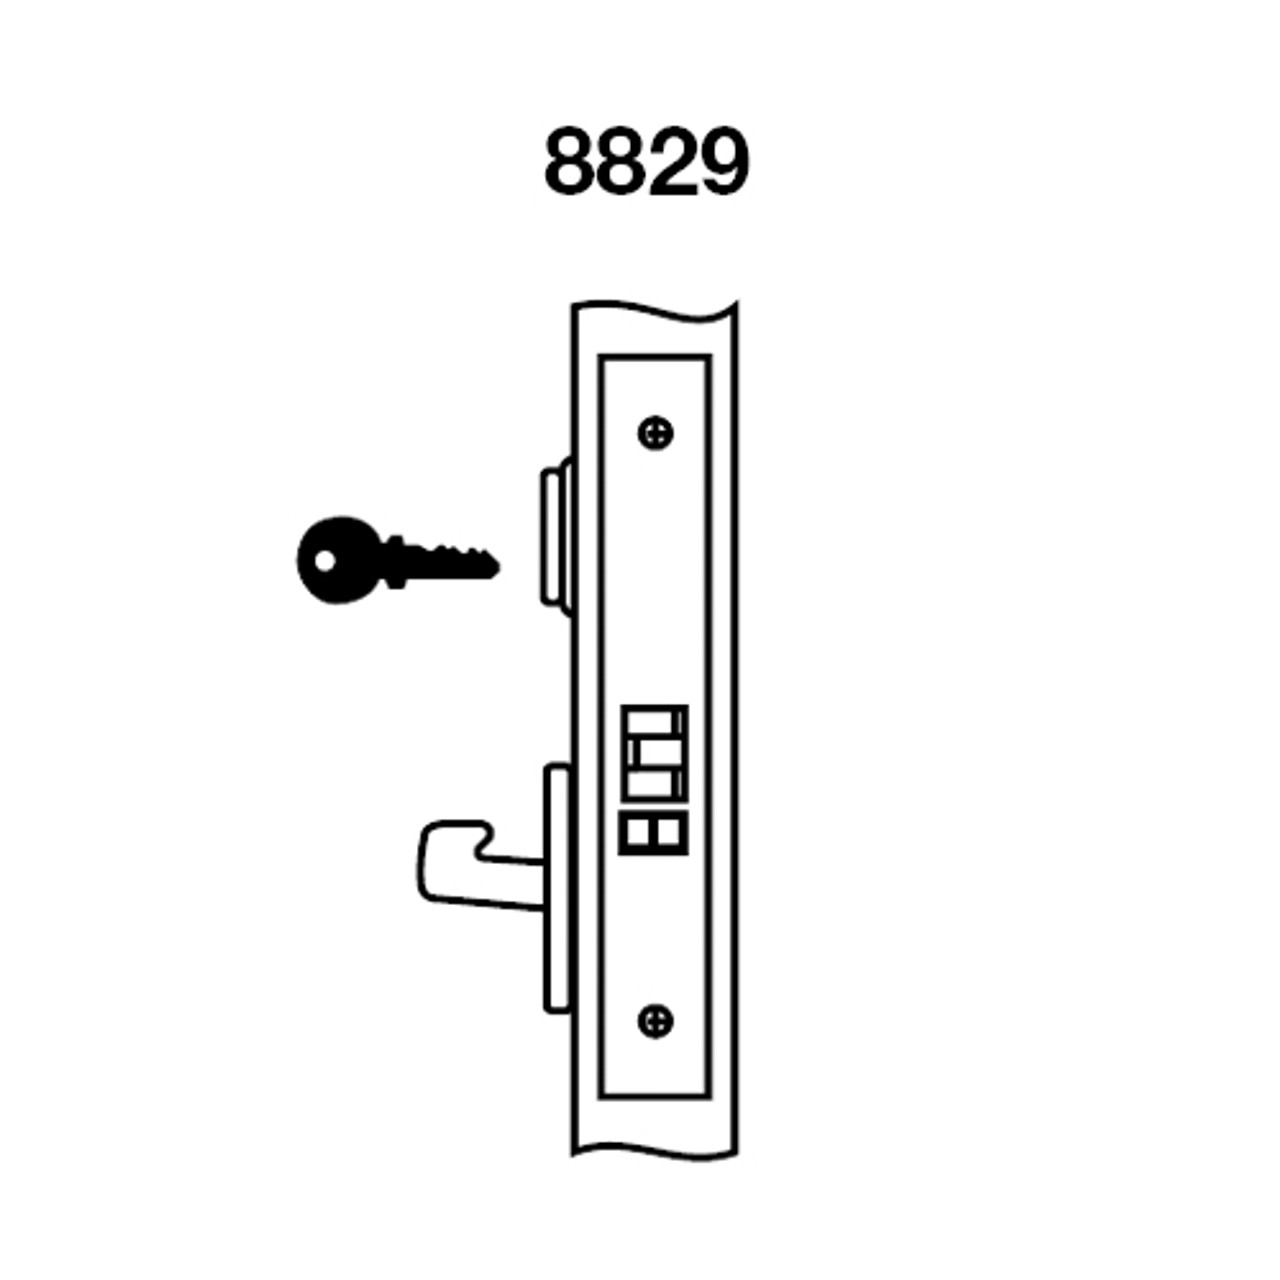 MOCN8829FL-618 Yale 8800FL Series Single Cylinder Mortise Closet Locks with Monroe Lever in Bright Nickel